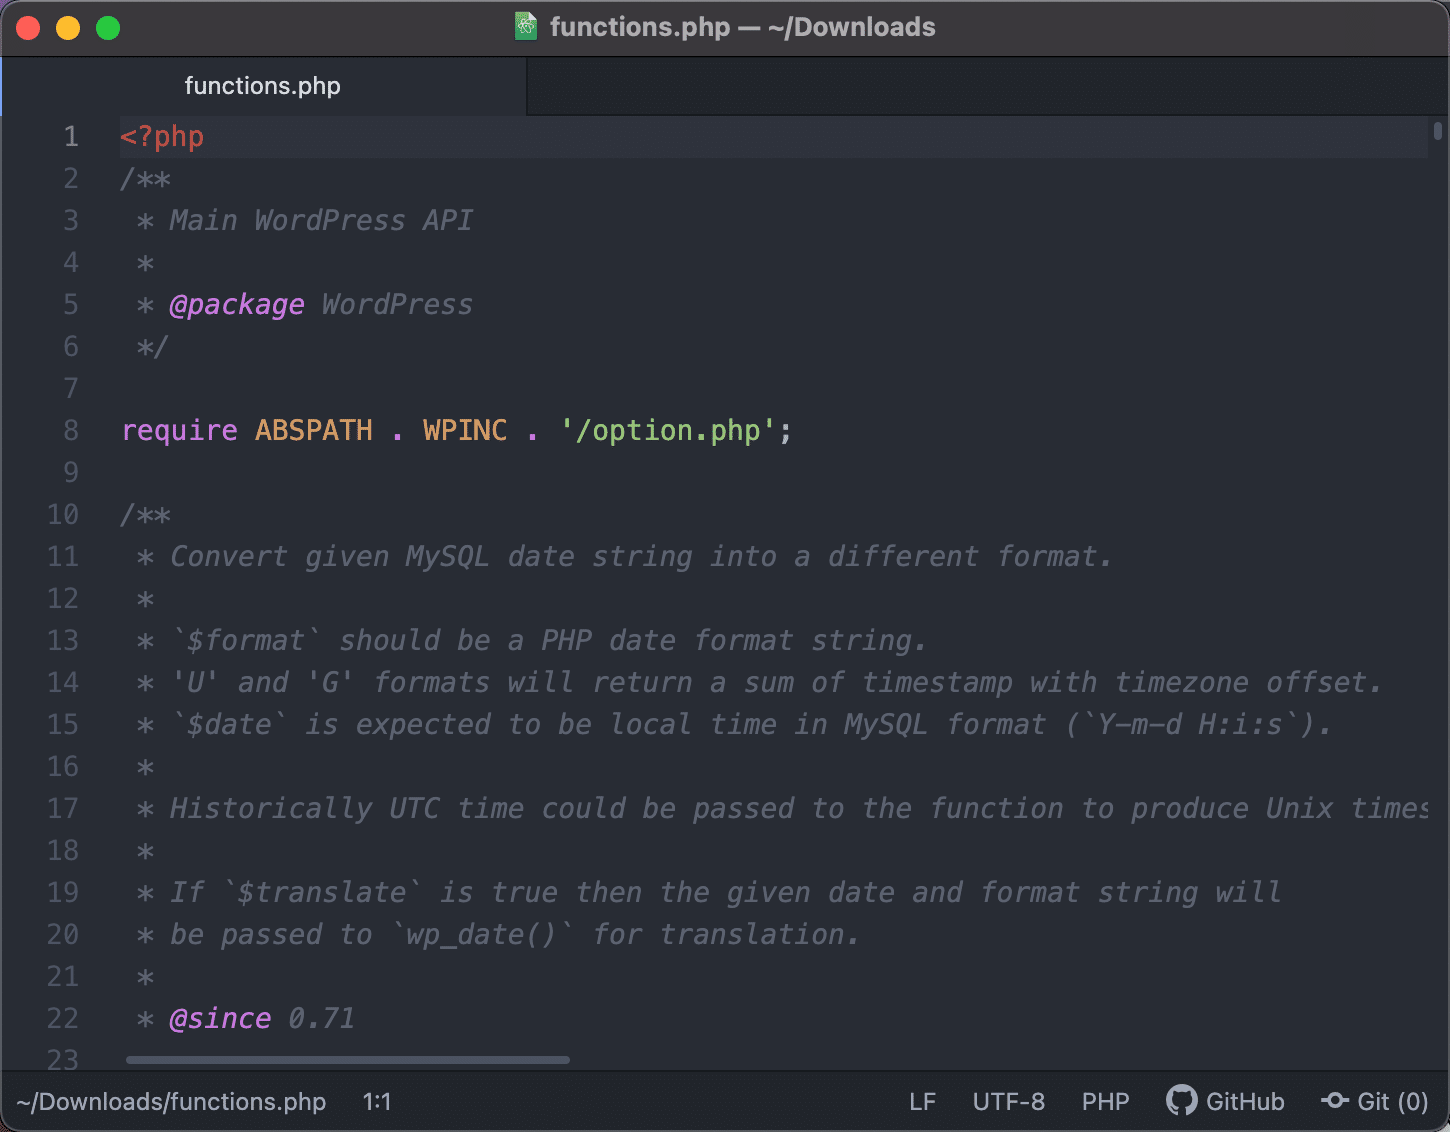 Viewing the functions.php file in Atom.